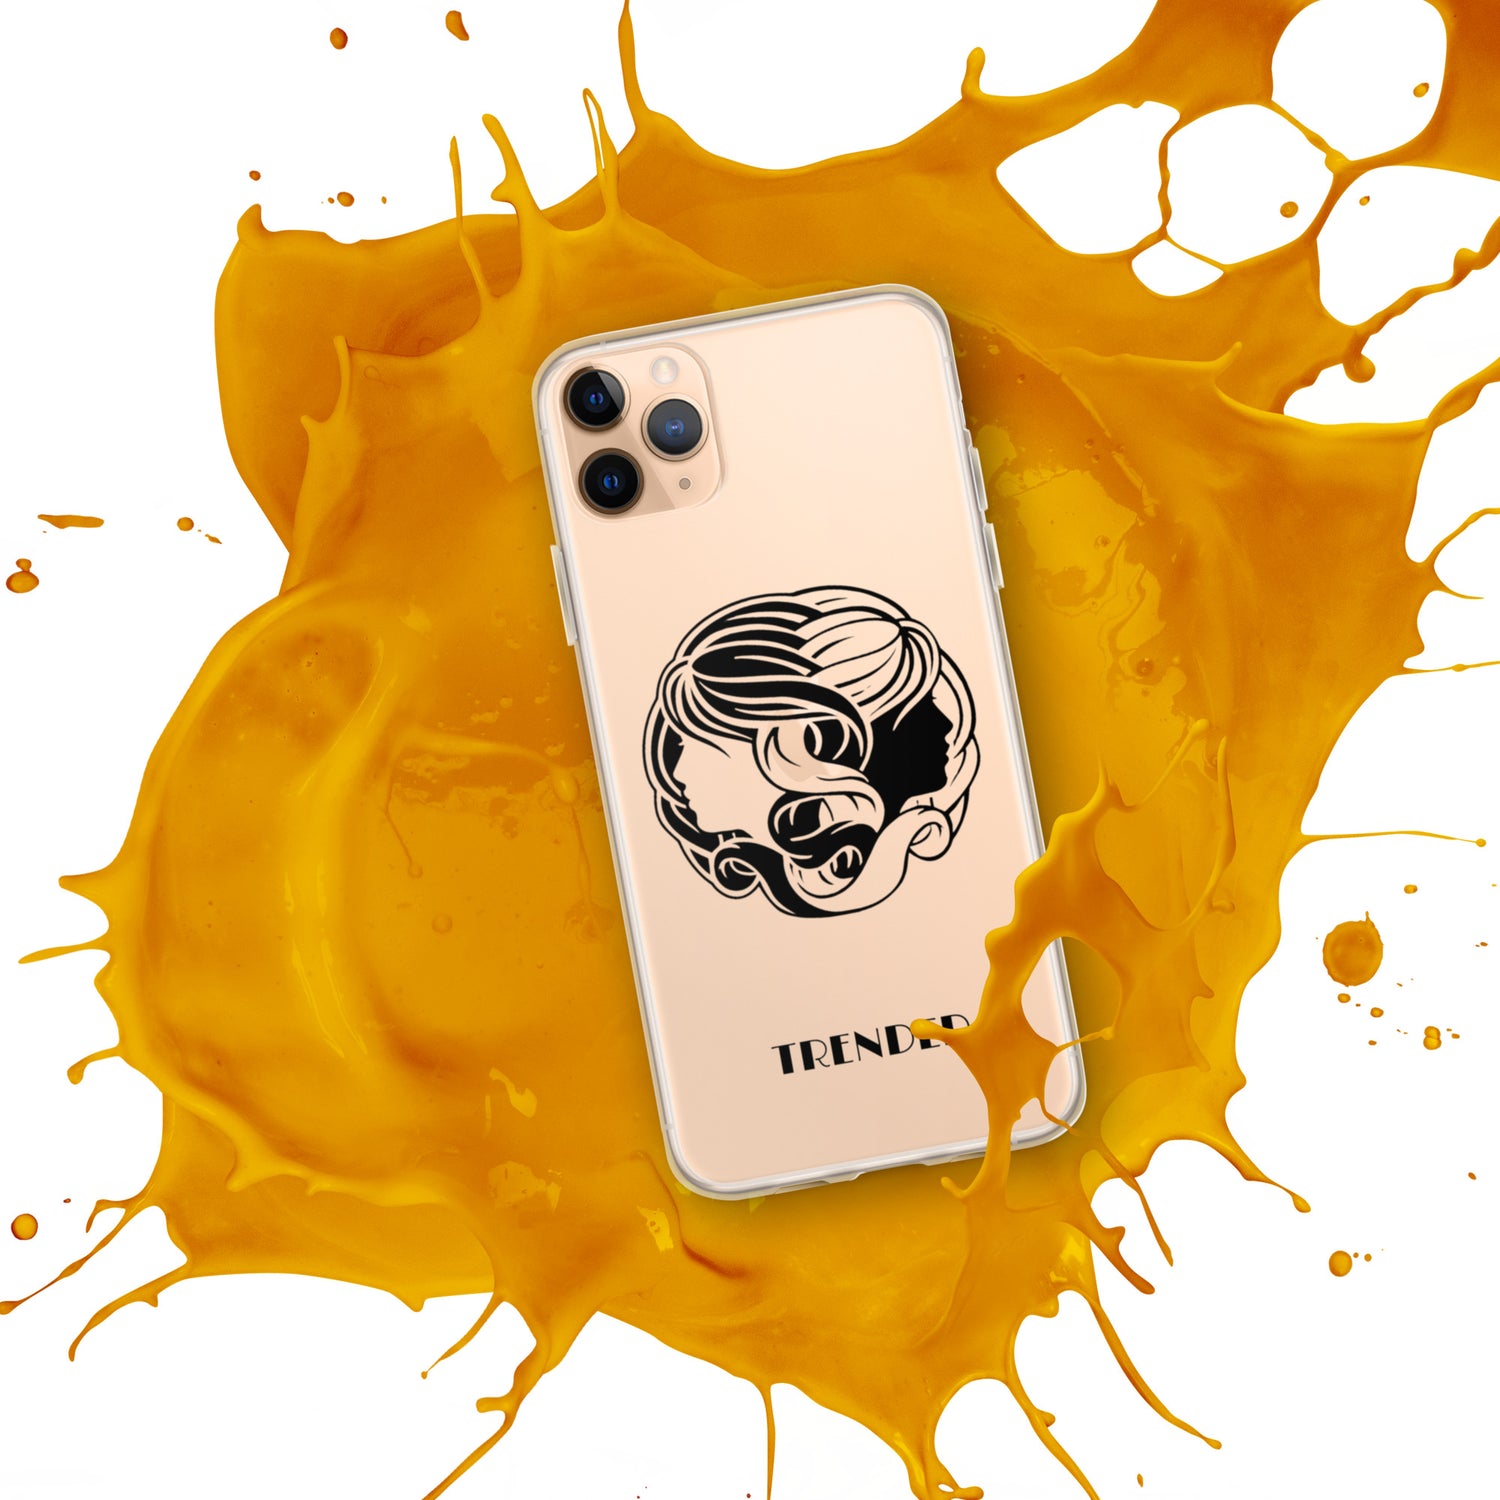 Phone cases? - yeah those too!